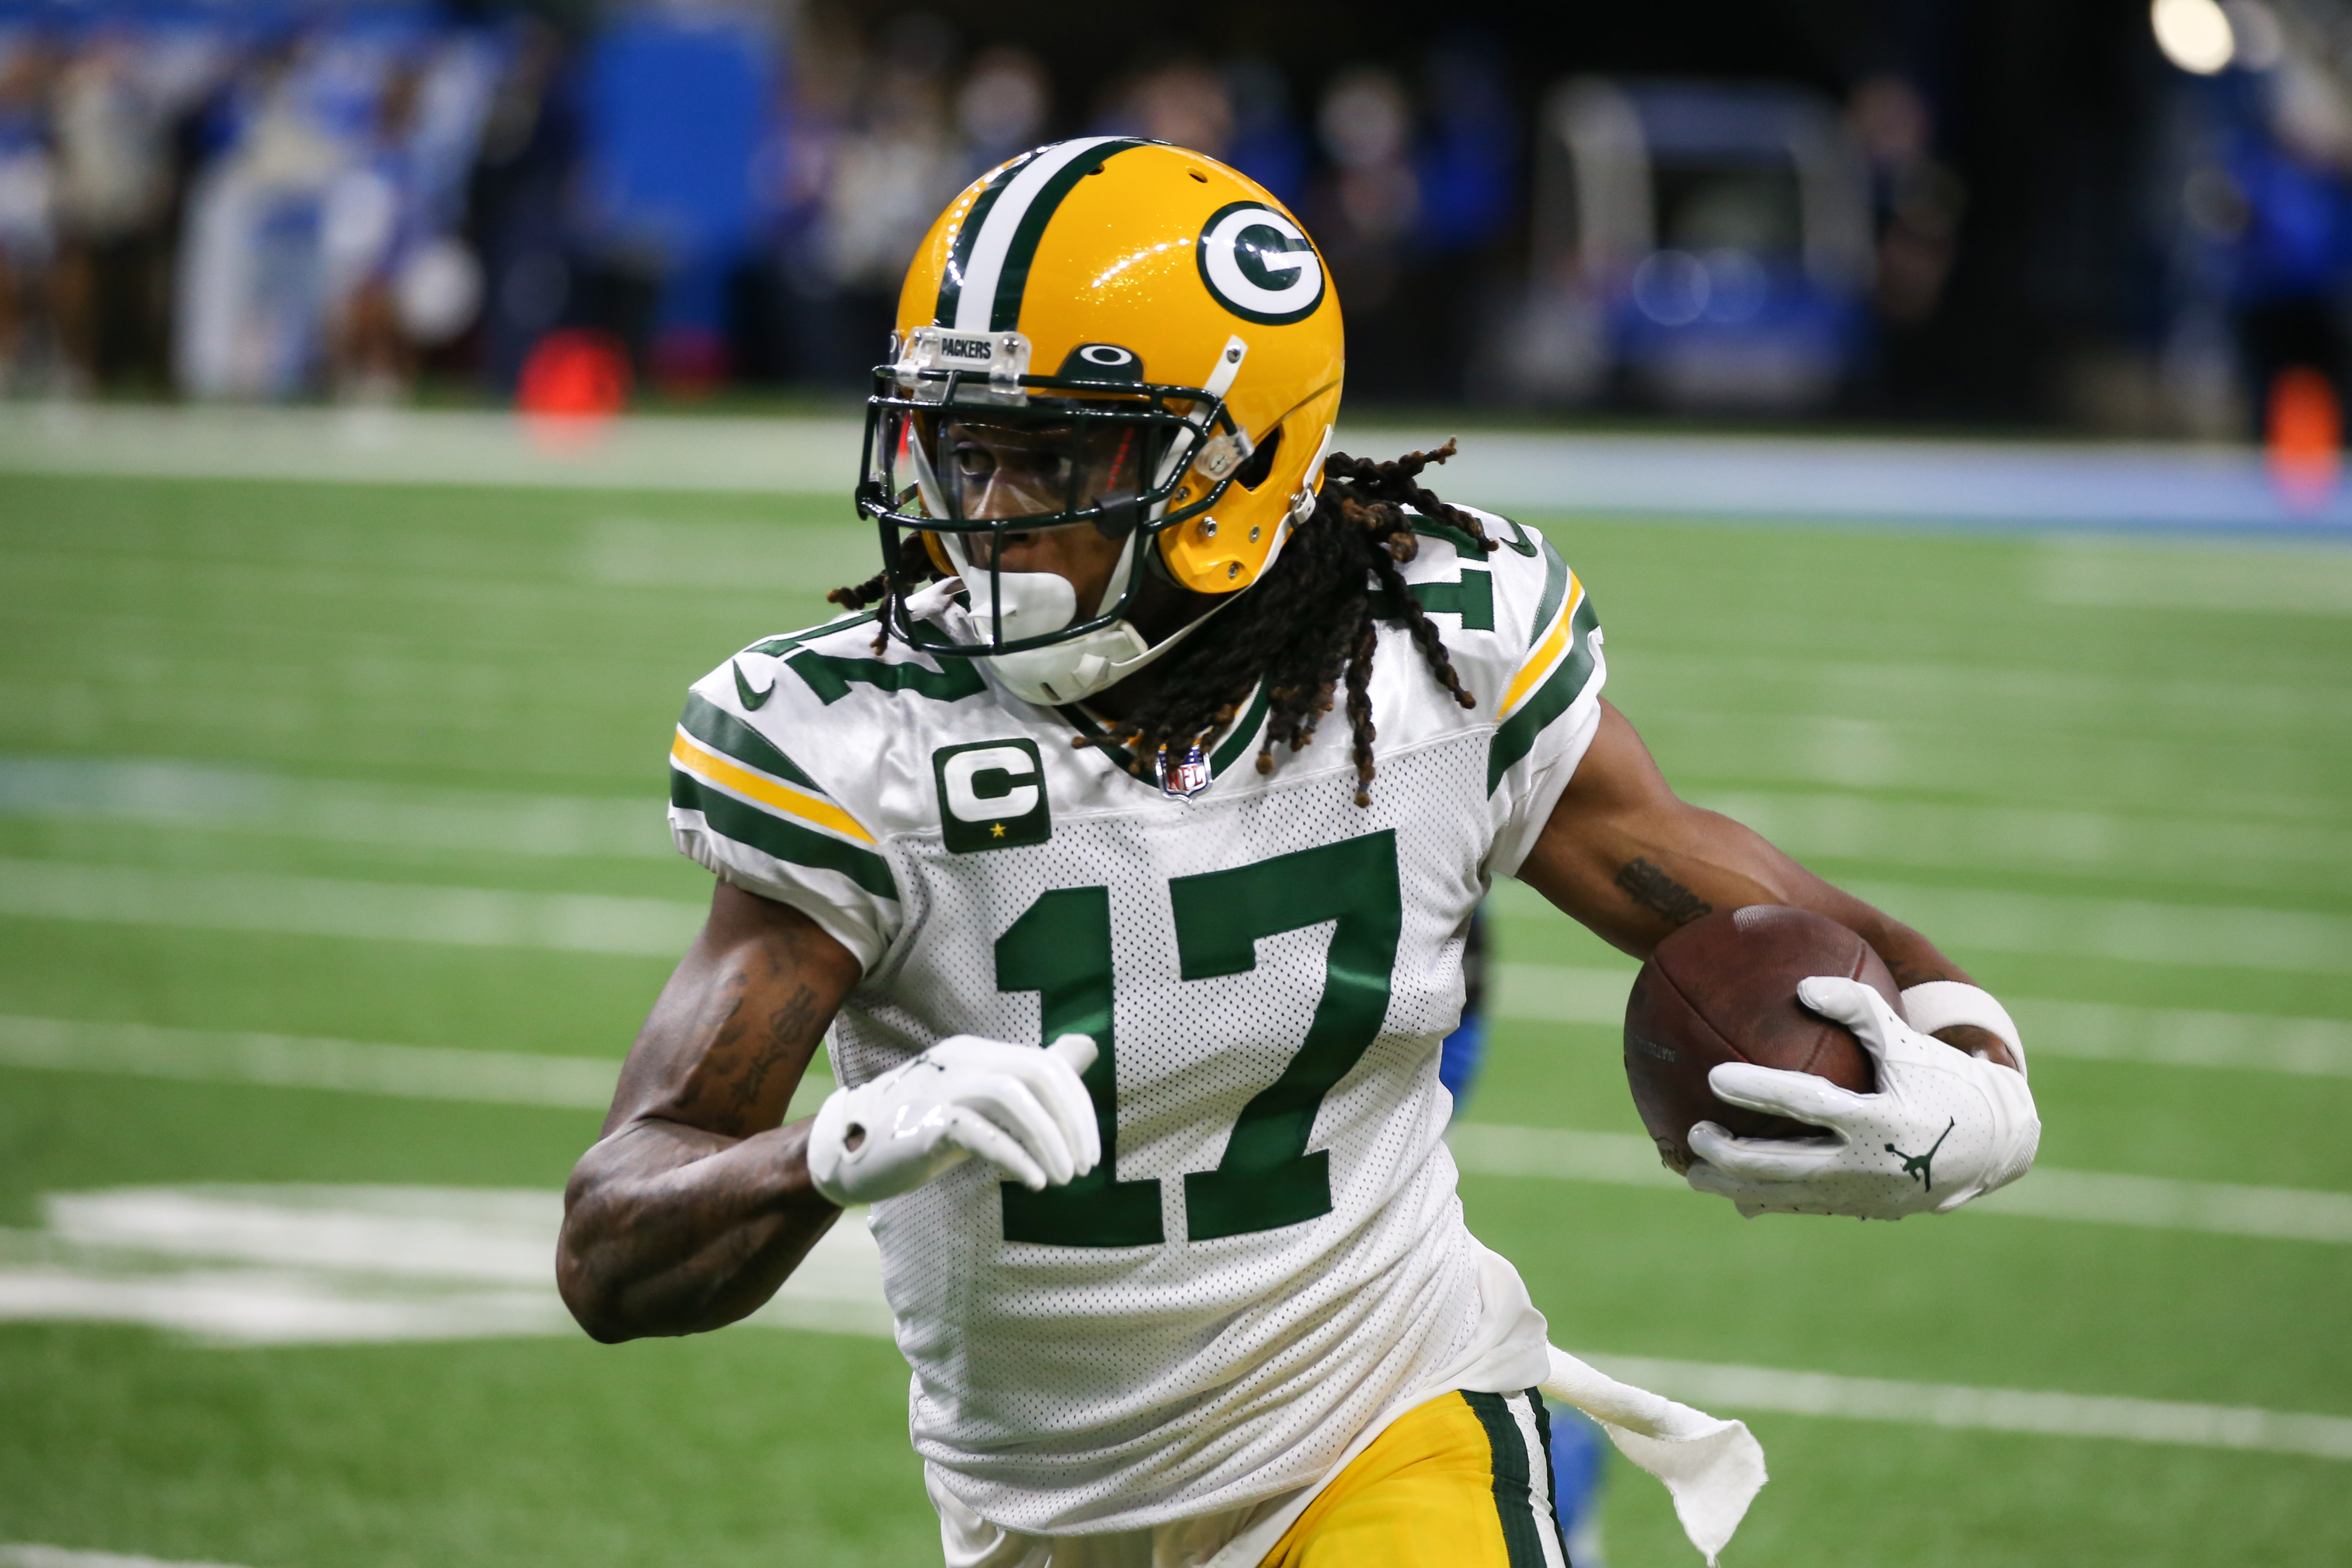 Report: Davante Adams Traded to Raiders from Packers; Signs 5-Year